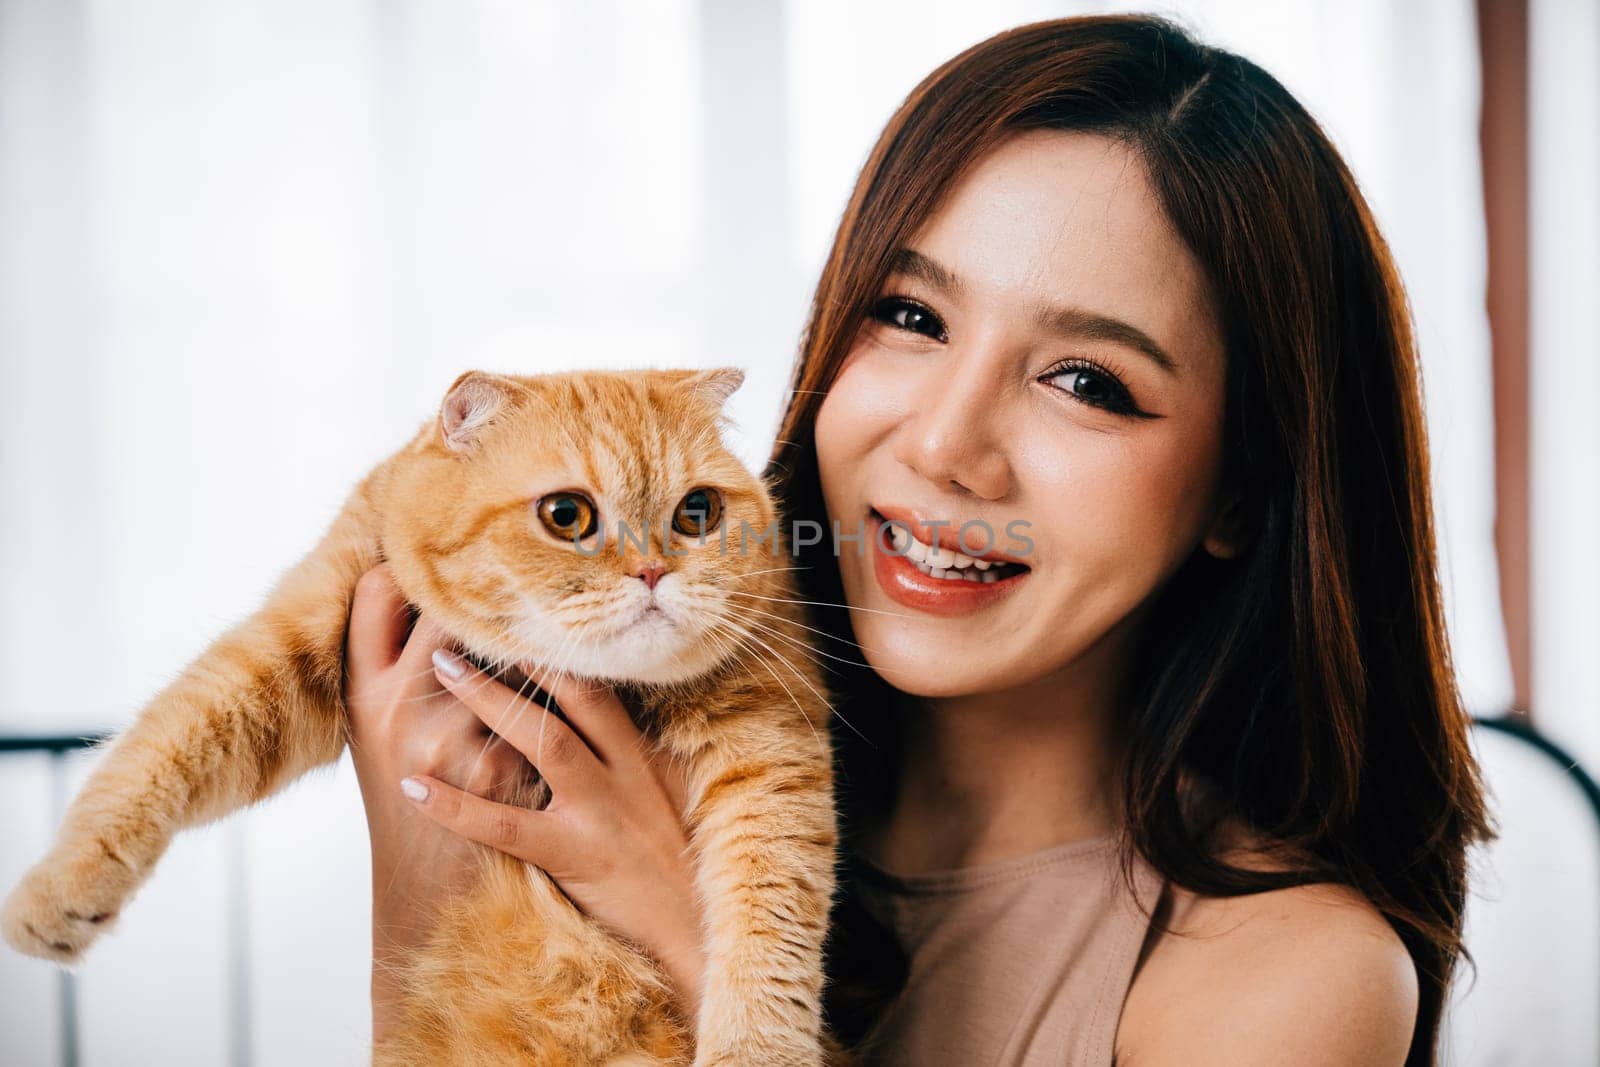 A touching portrait captures a woman's affectionate embrace of her beloved orange Scottish Fold cat. The image radiates joy, love, and the special connection between them. by Sorapop